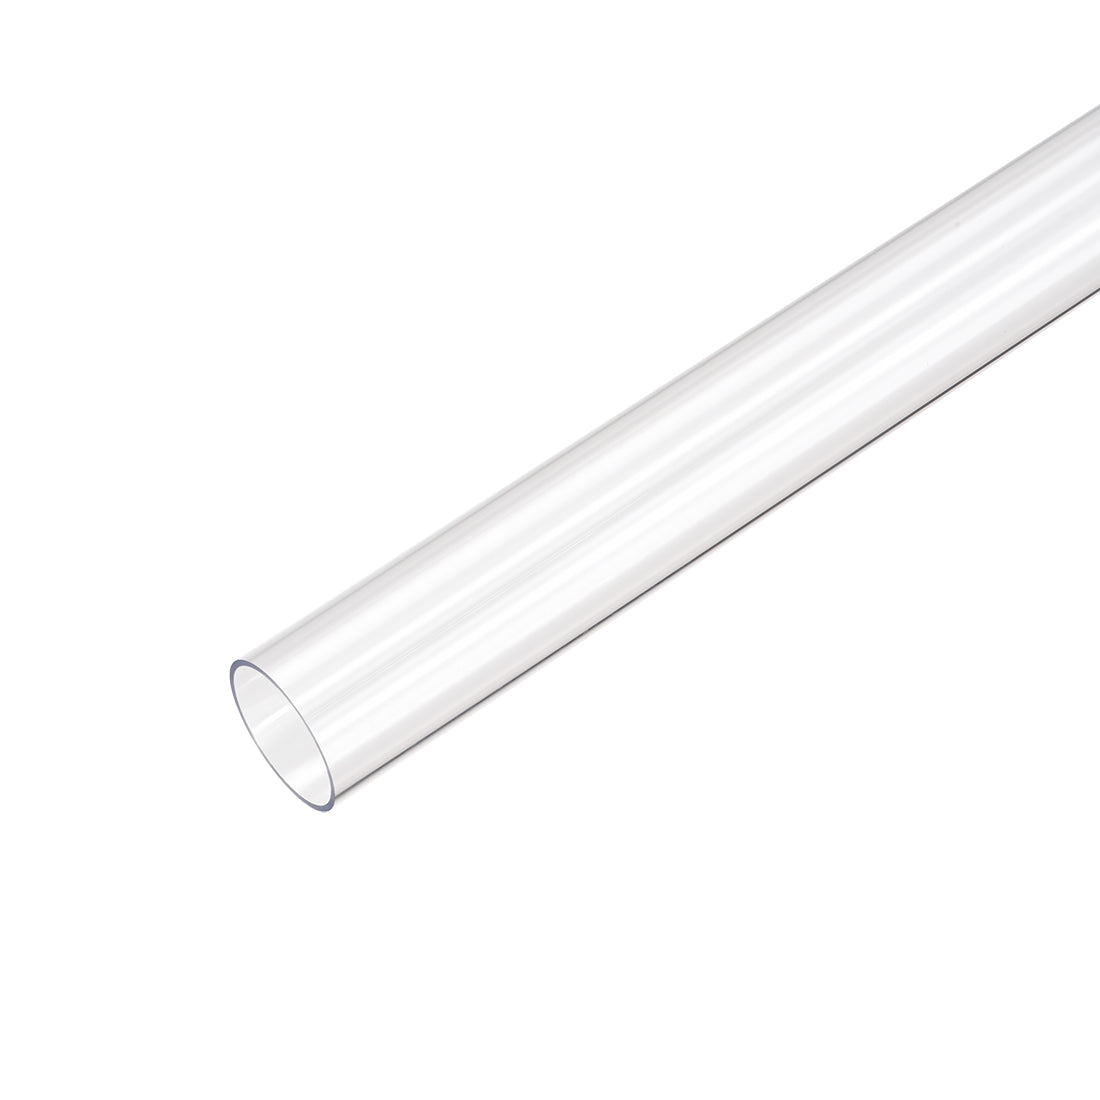 uxcell Uxcell PVC Rigid Round Tubing,Clear,12mm ID x 13mm OD,0.5M/1.64Ft Length